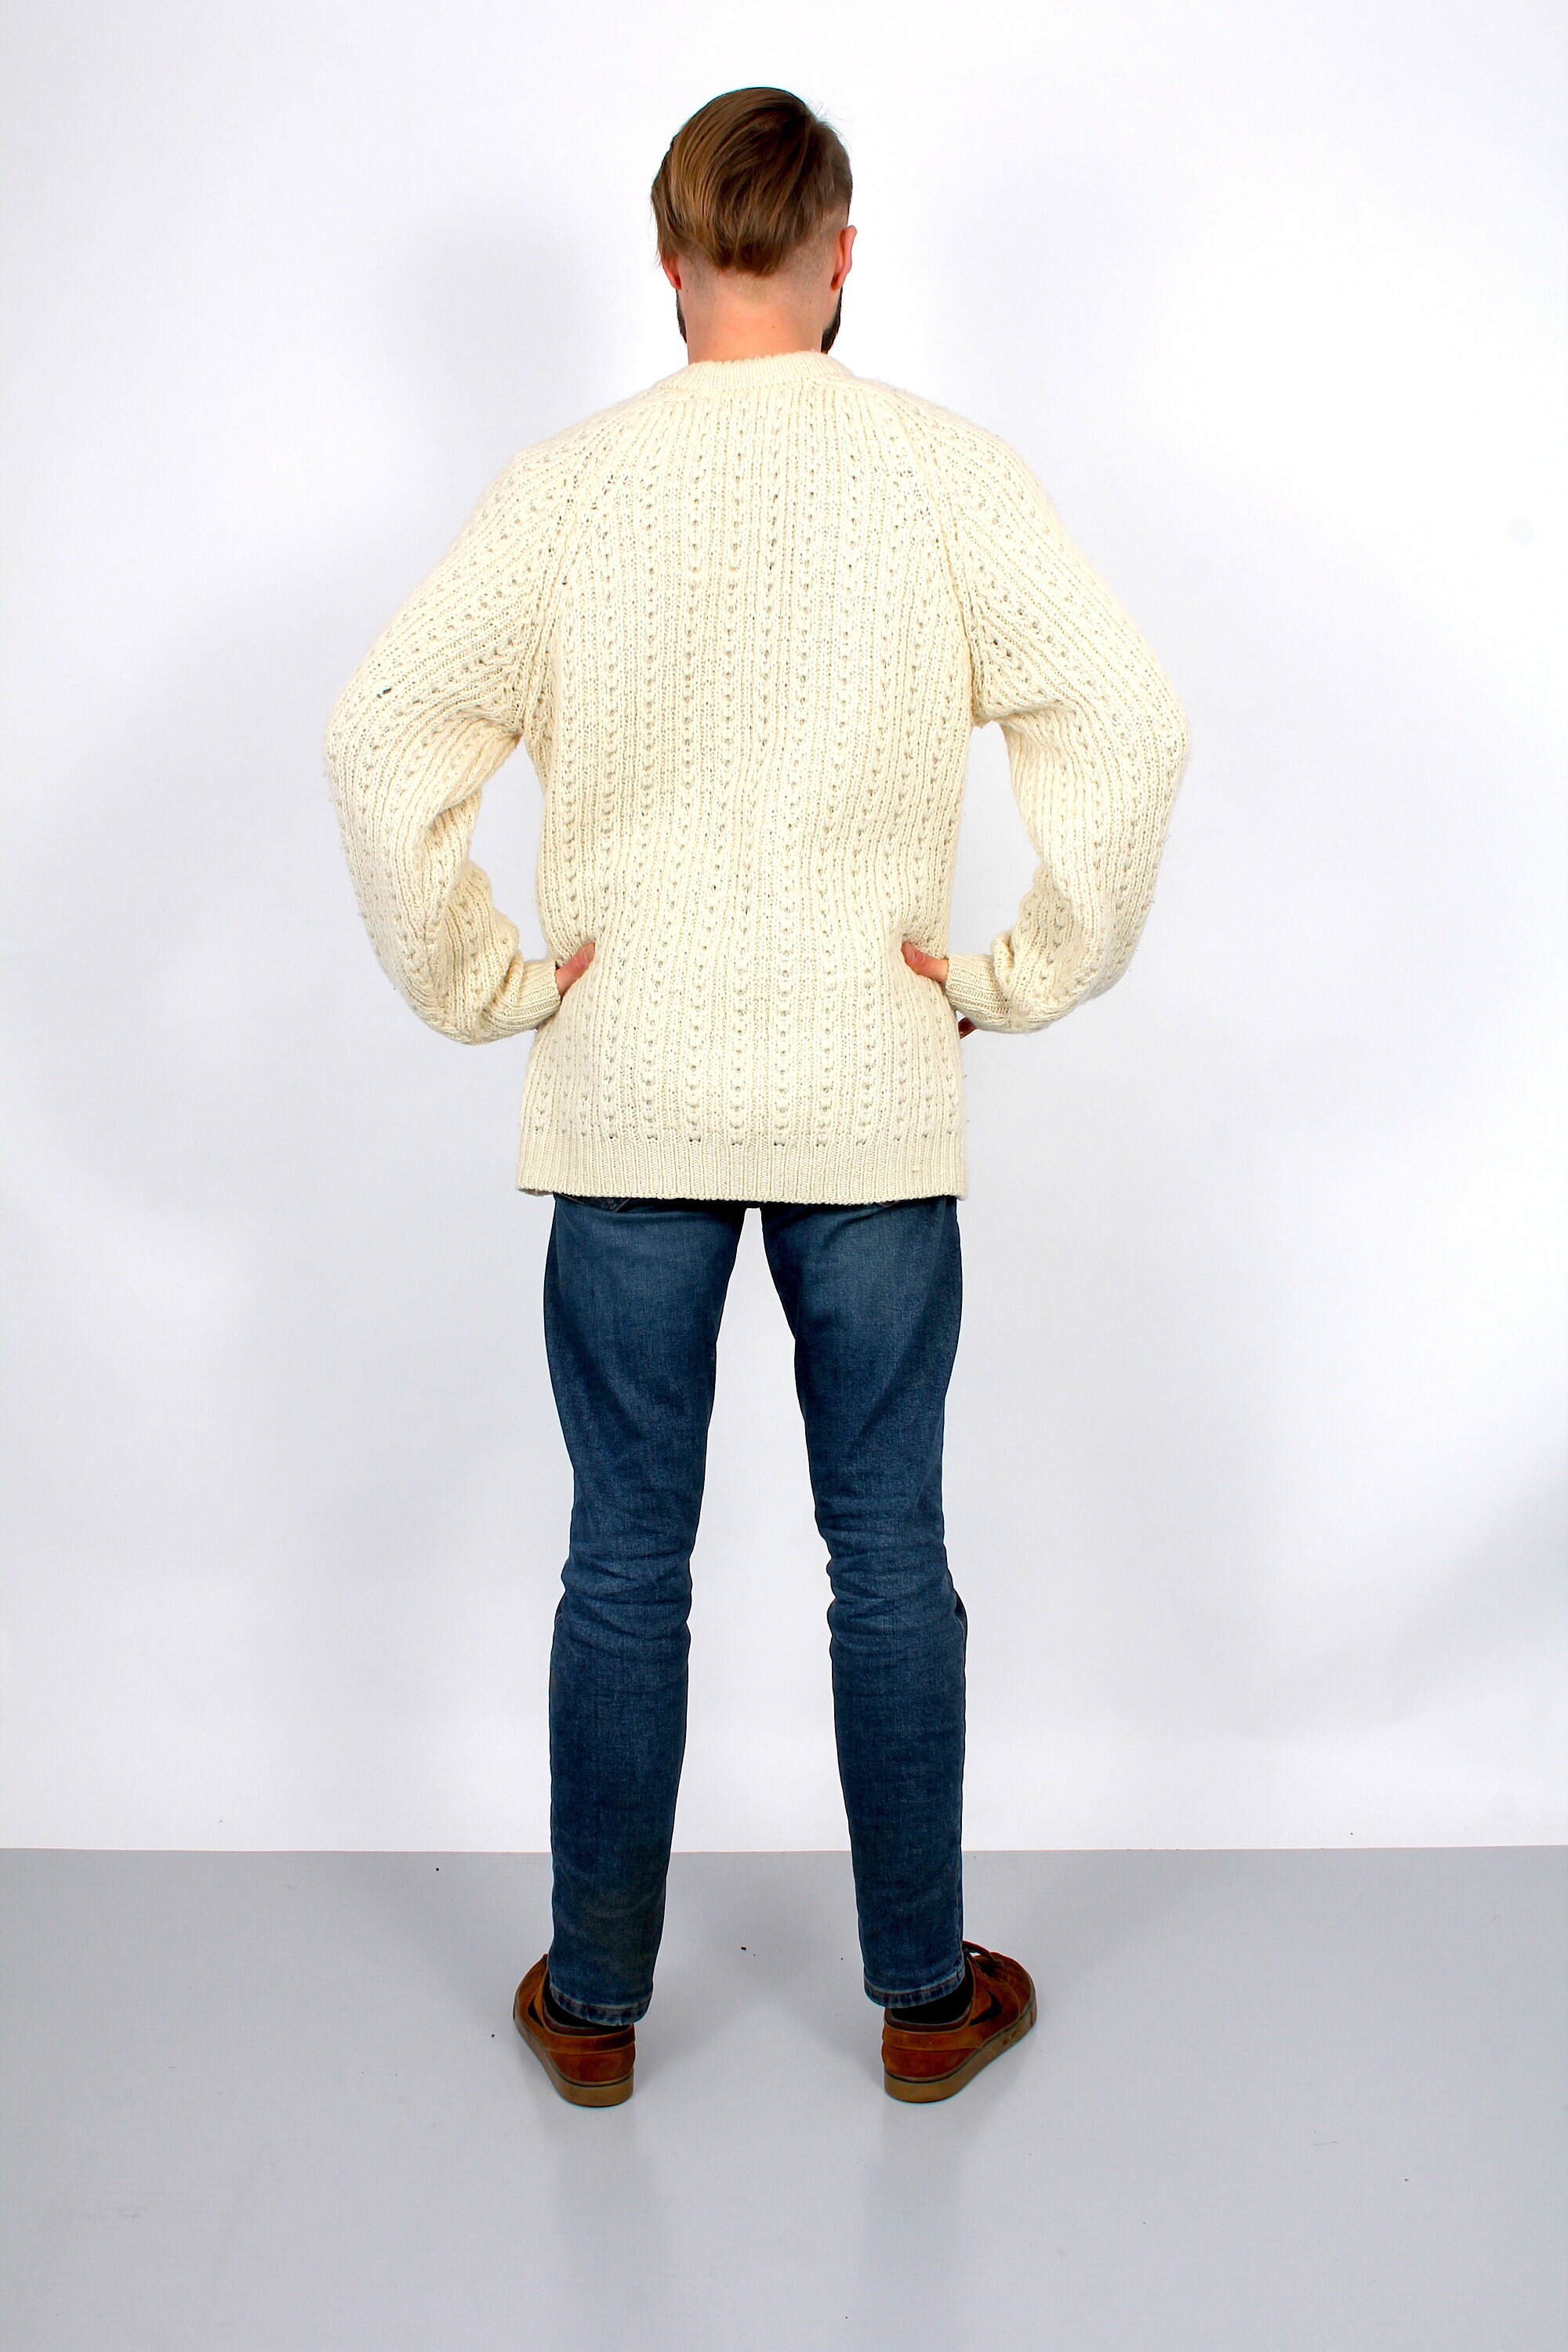 Knitted Oversized Sweater Unisex Long White Pullover M L